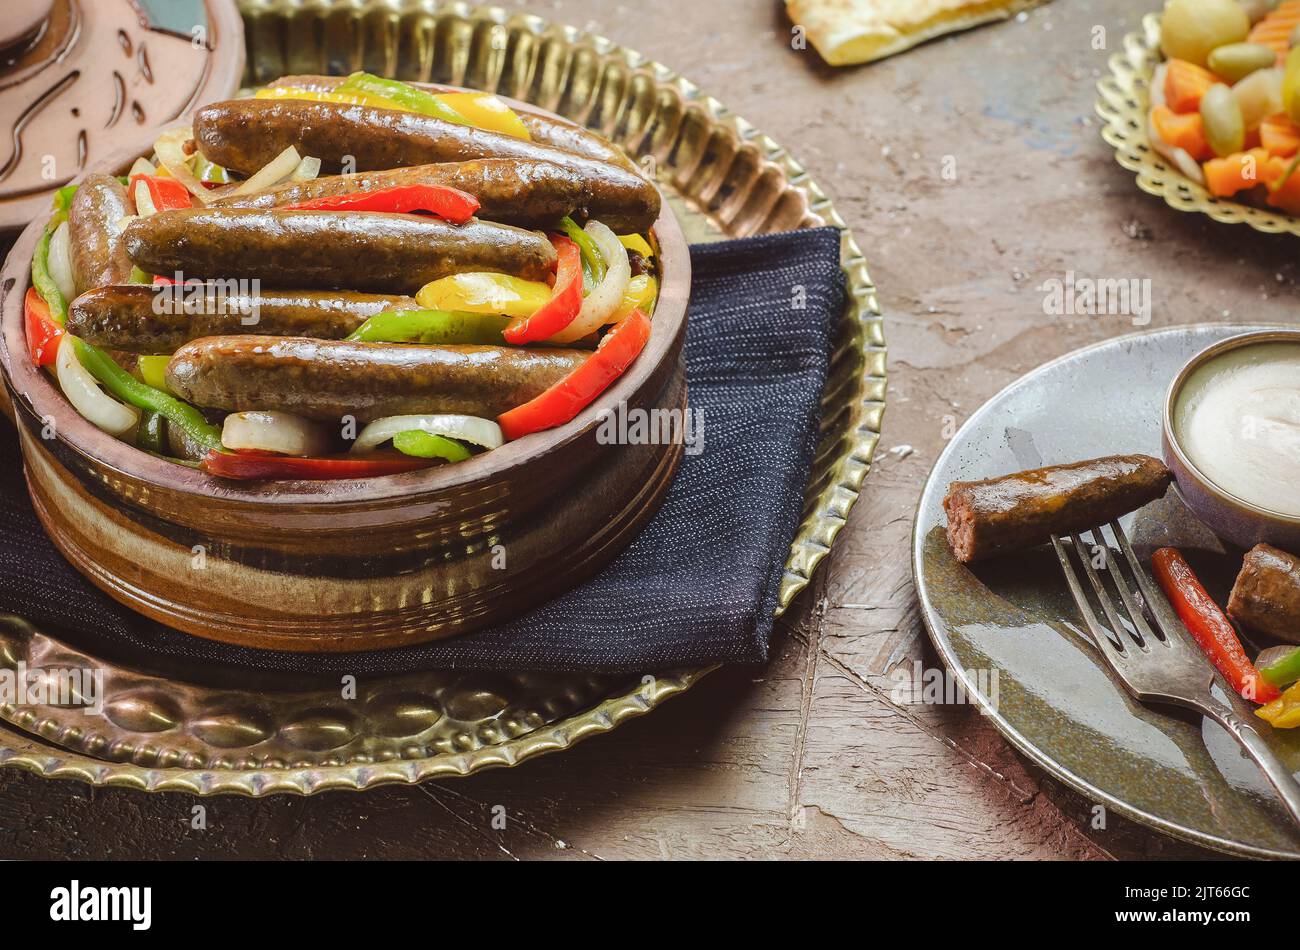 Arabic cuisine; Egyptian traditional sausage with onions, bell peppers and chili peppers. Served with oriental pickles, tahini sauce and pita bread. Stock Photo